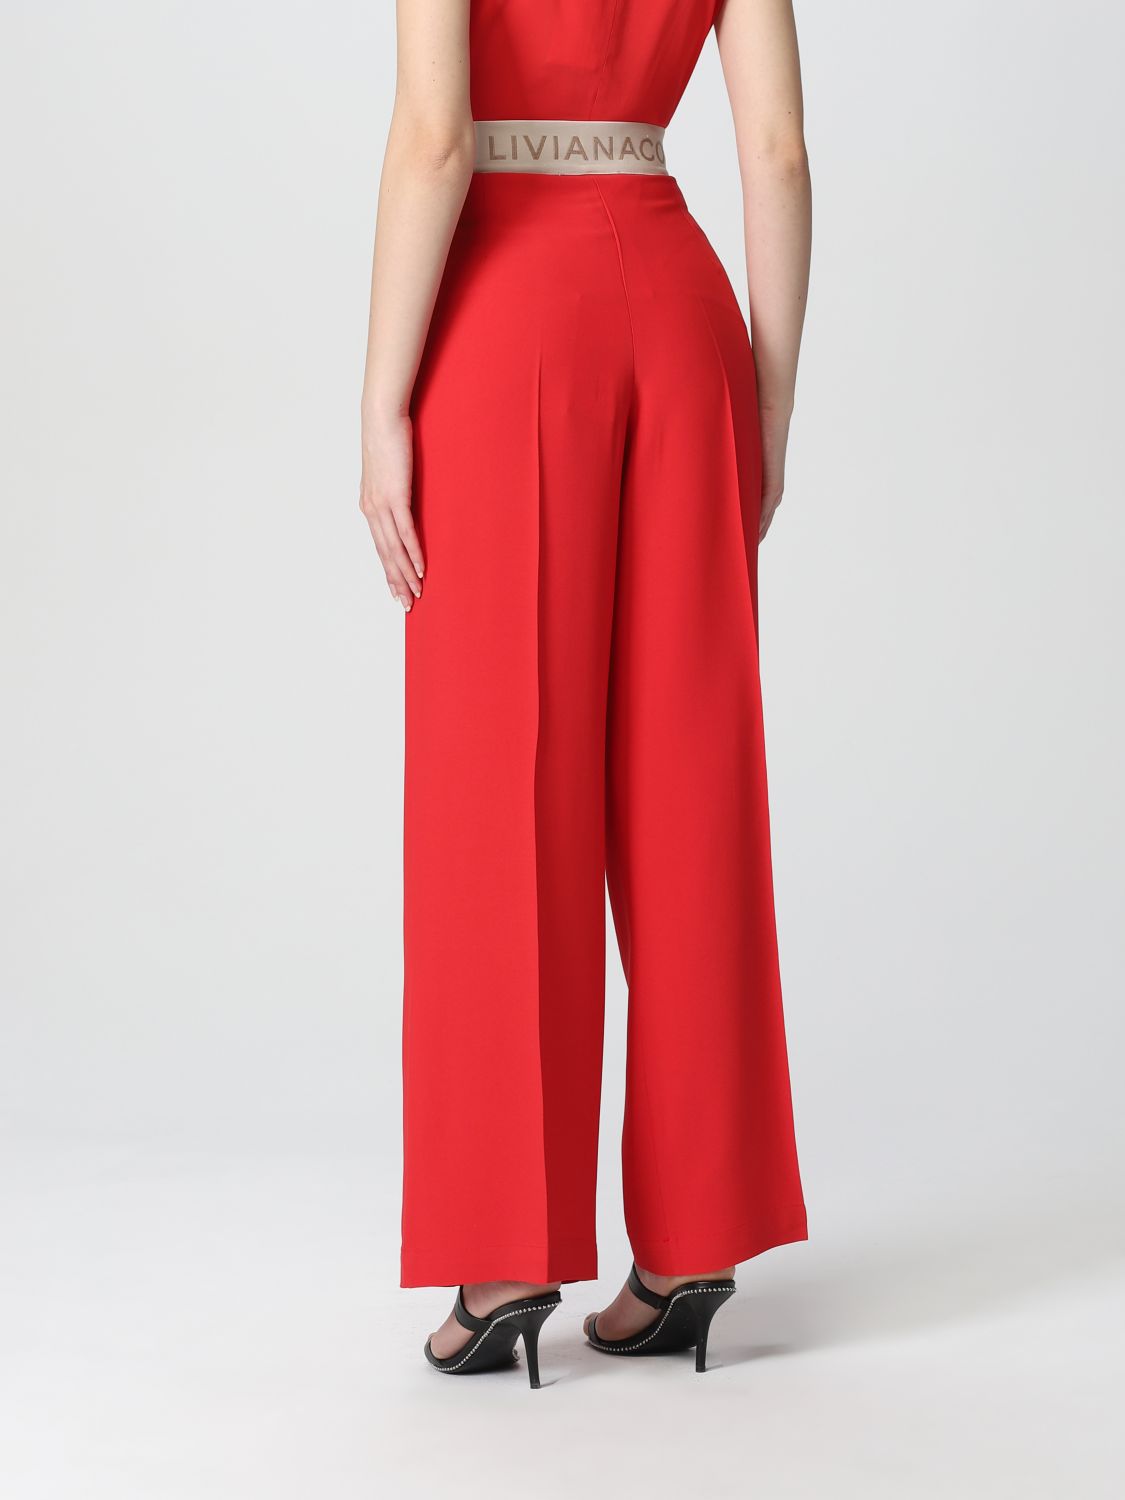 Liviana Conti Outlet: pants for woman - Coral | Liviana Conti pants ...